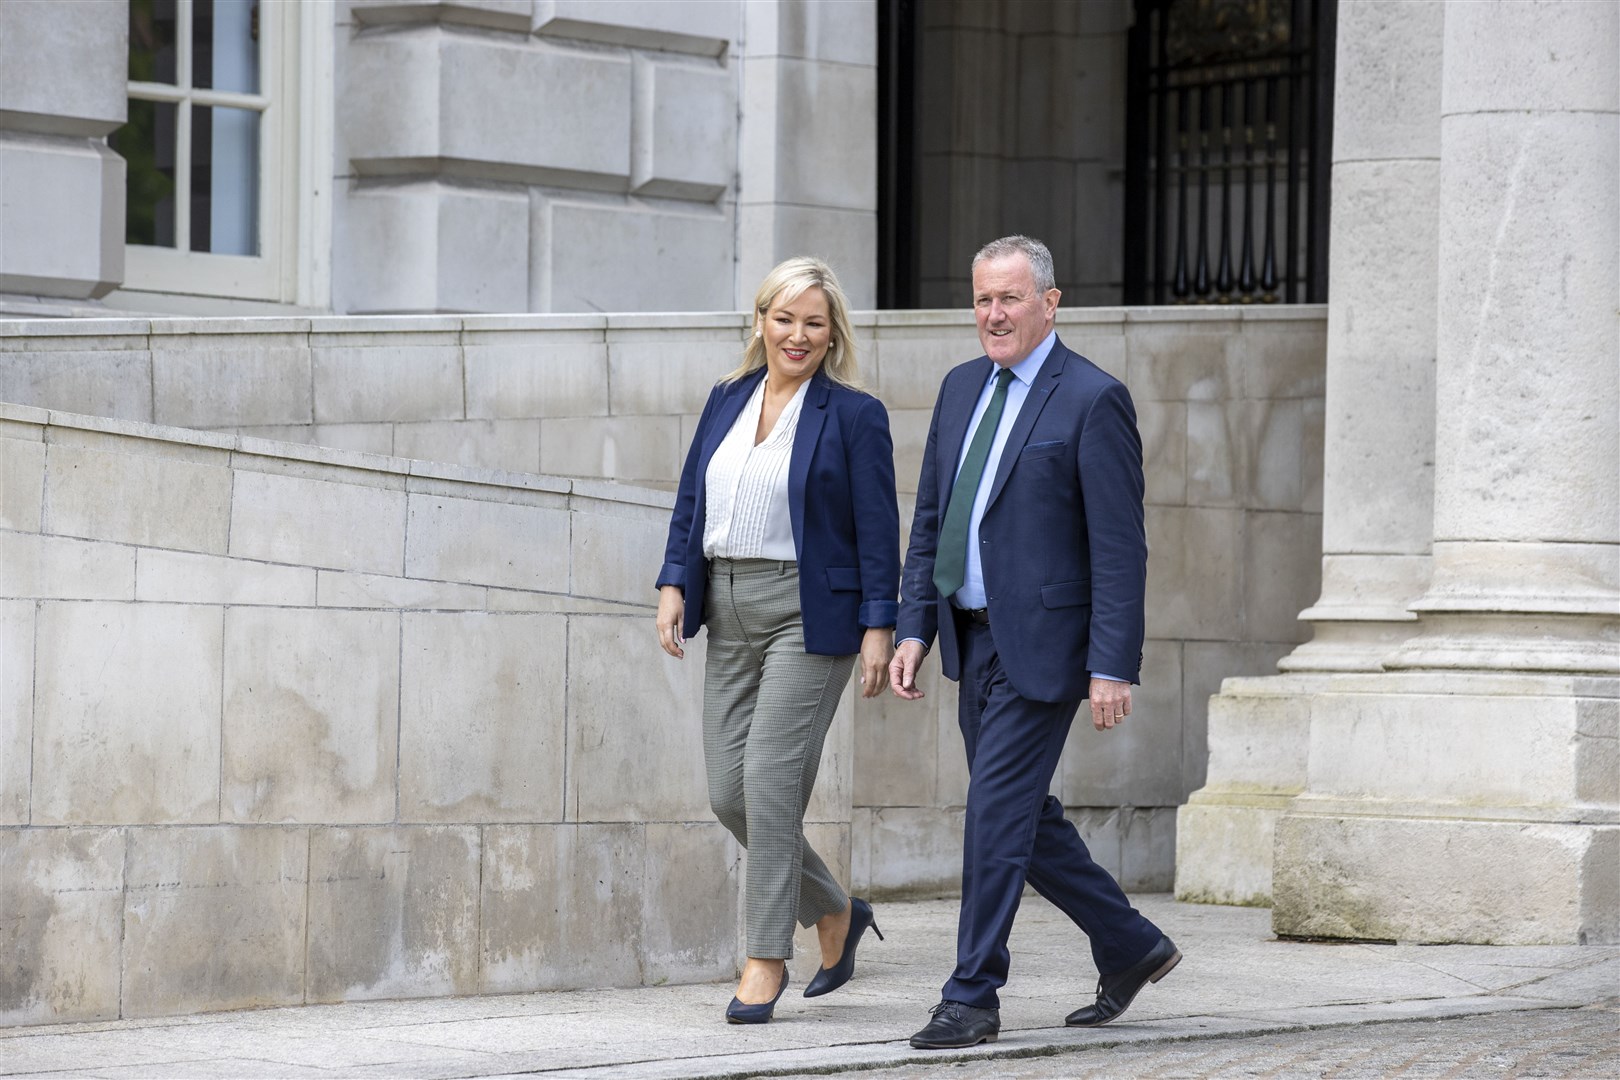 Sinn Fein vice president Michelle O’Neill and Conor Murphy outside Belfast City Hall (Liam McBurney/PA)